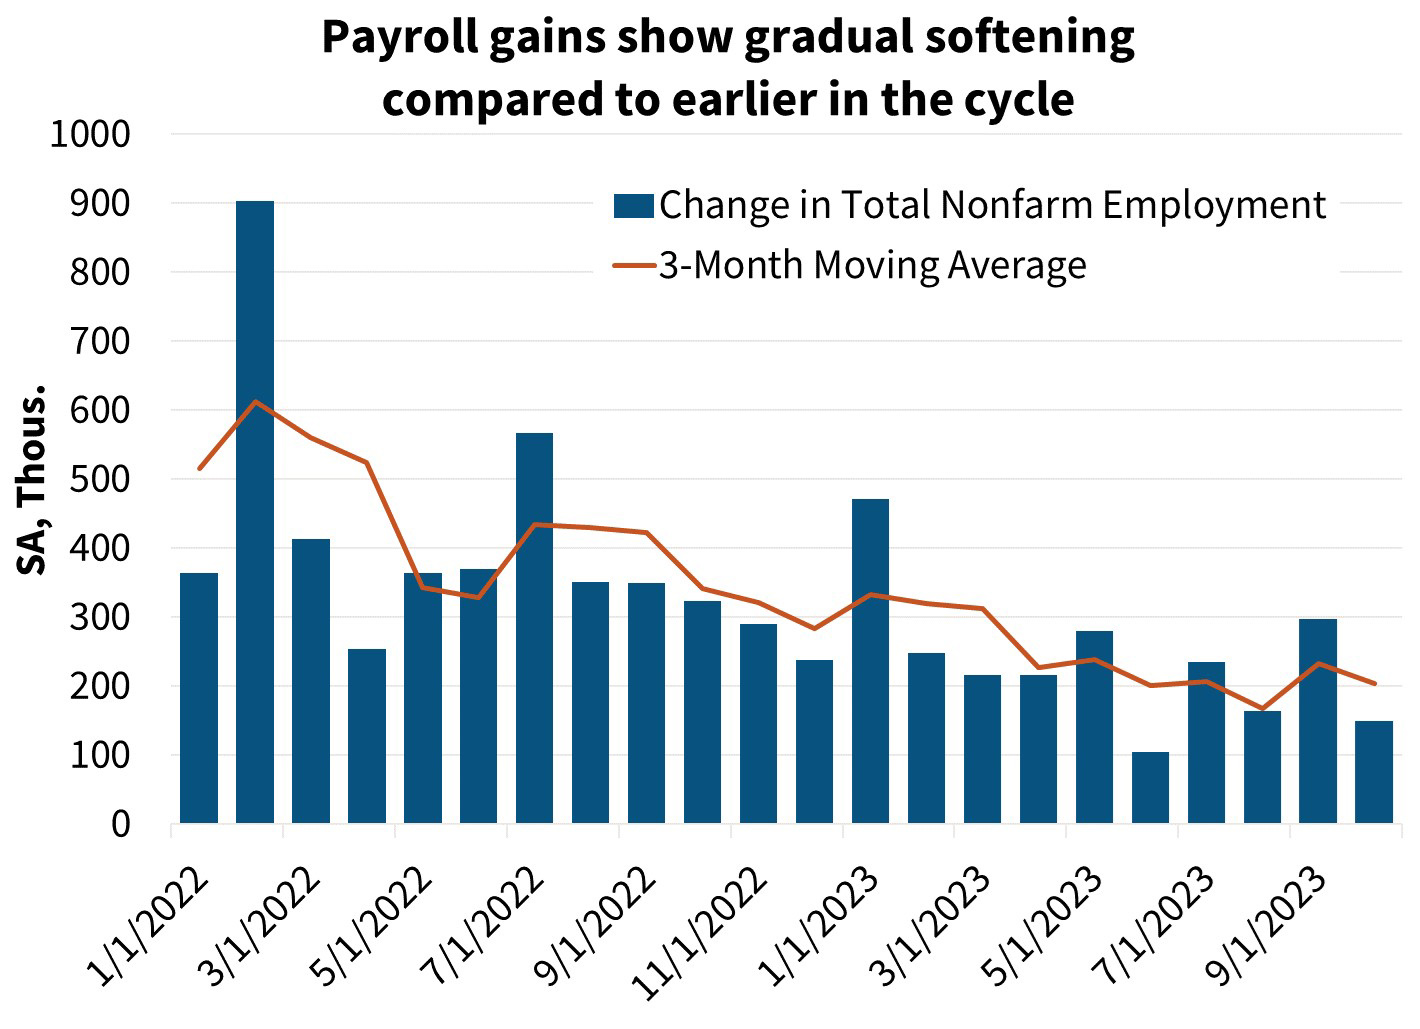 Payroll gains show gradual softening compared to earlier in the cycle